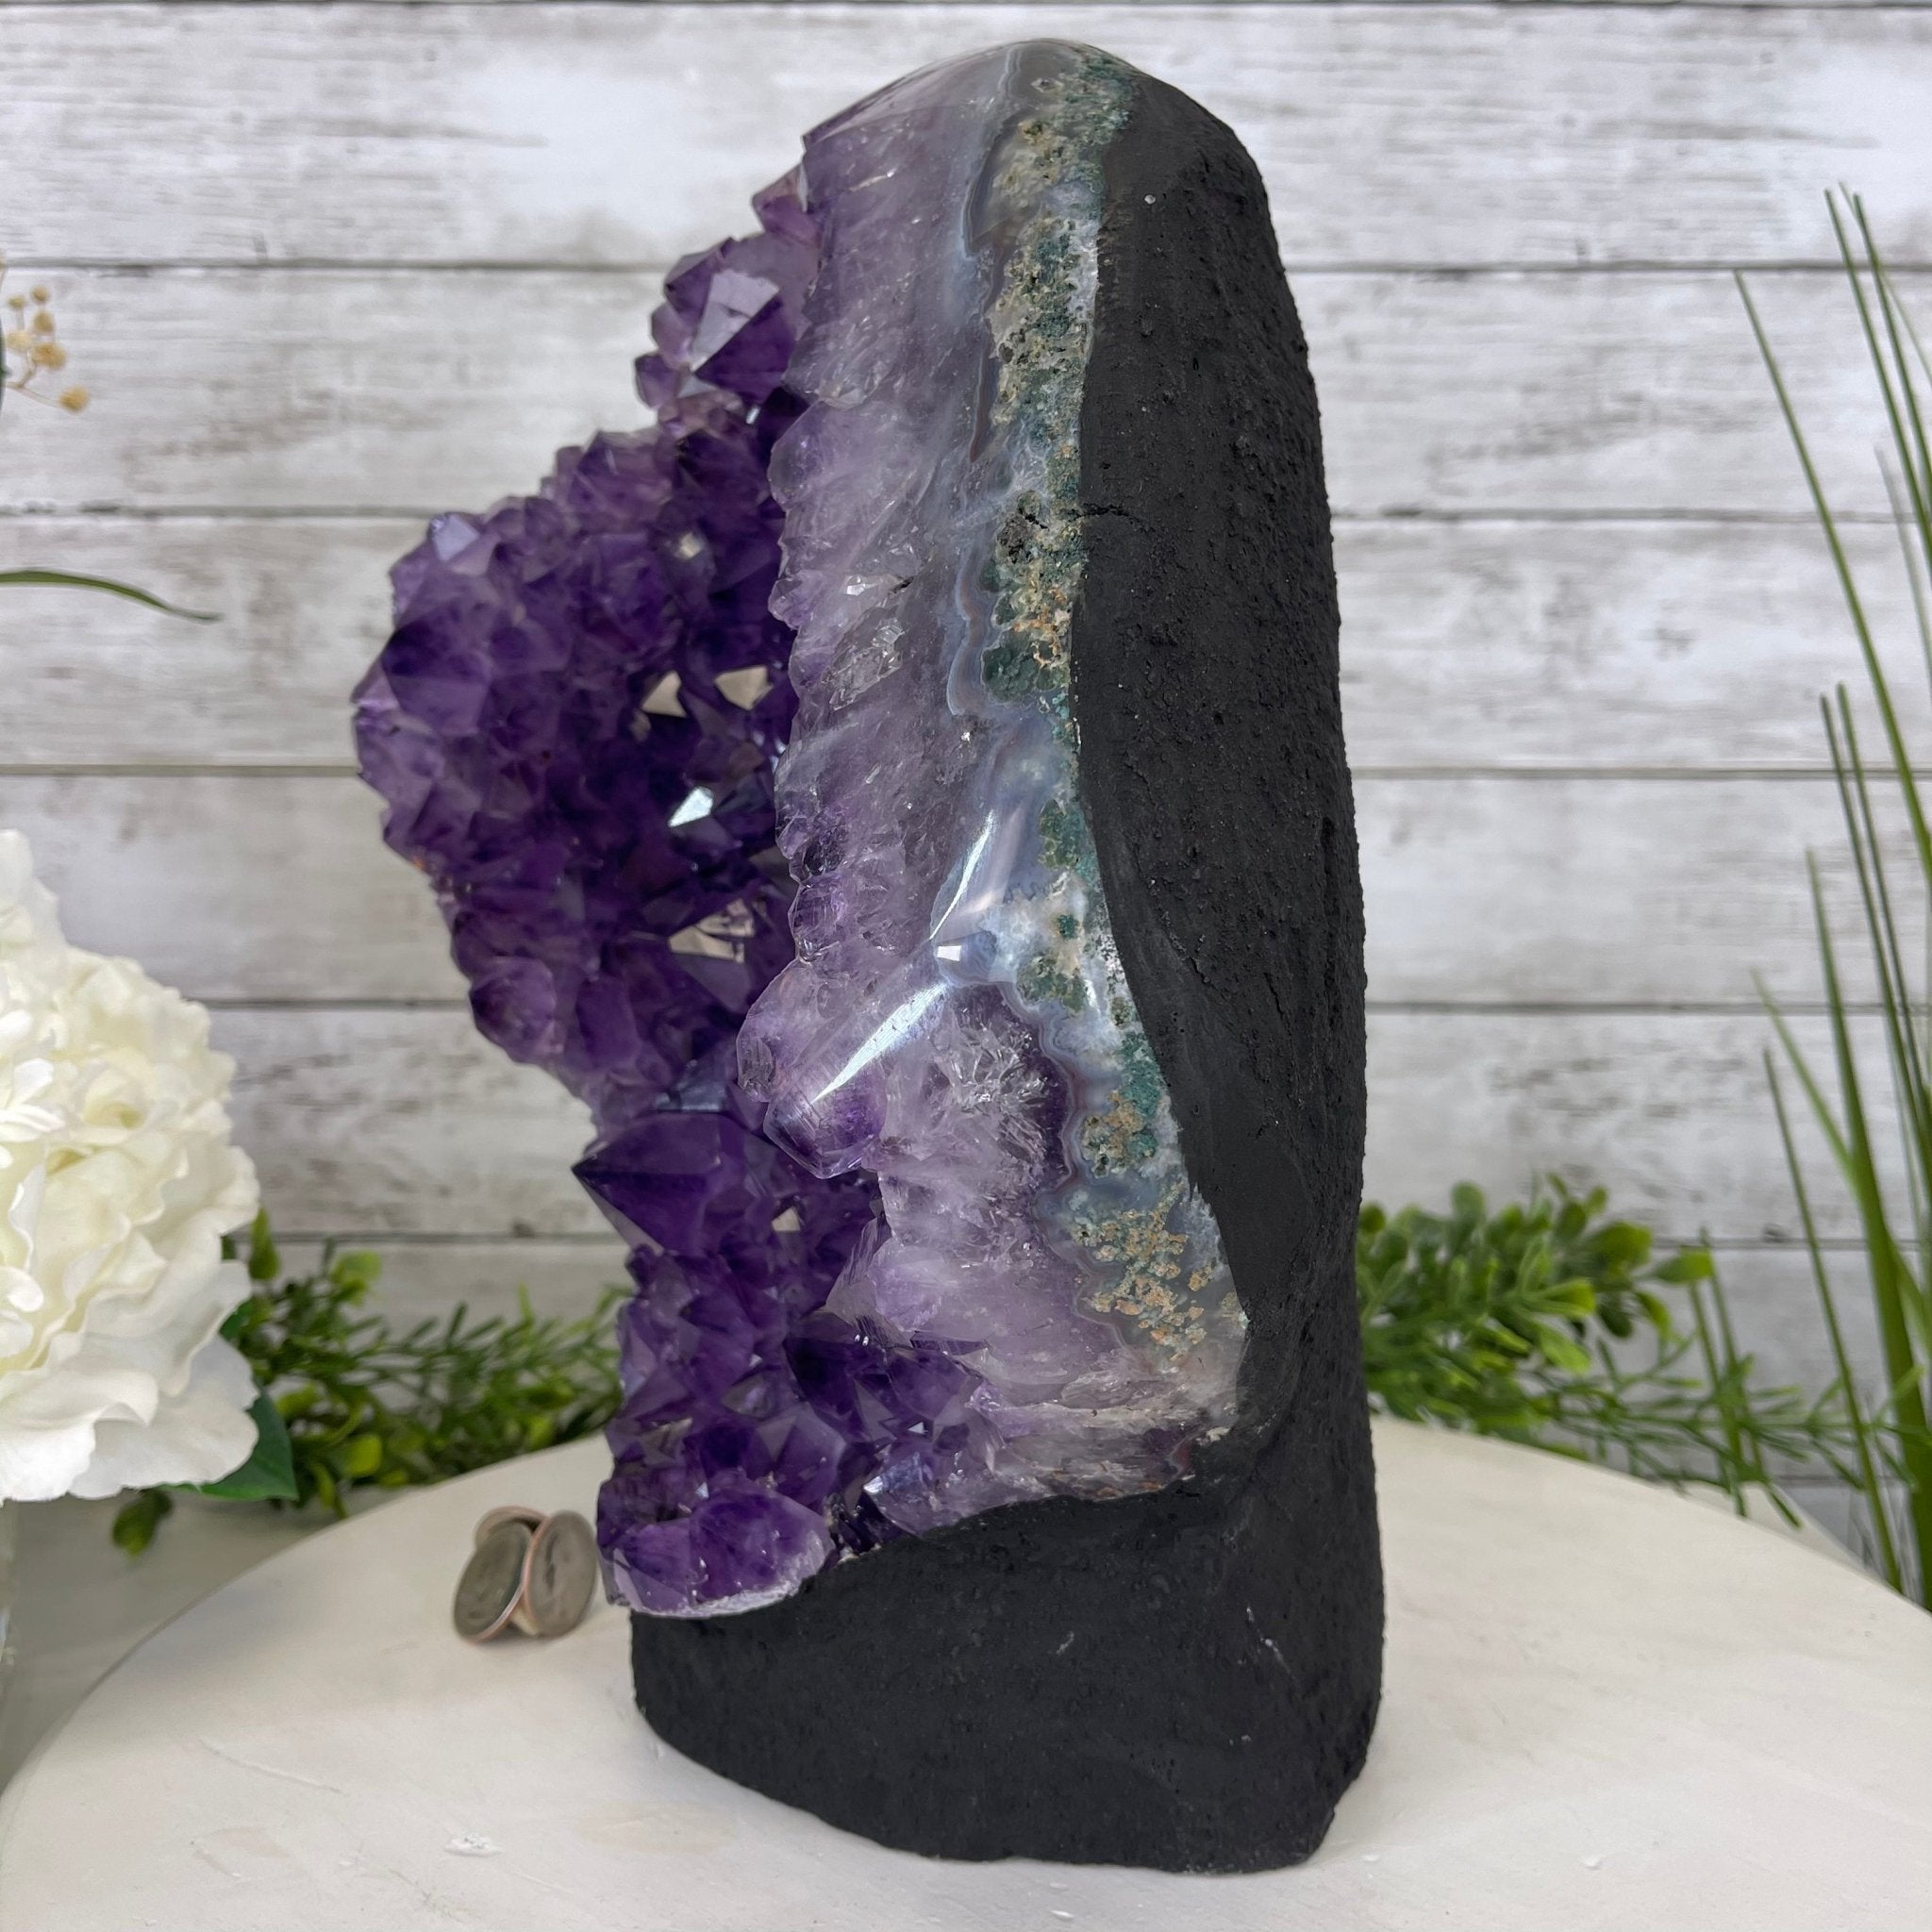 Extra Quality Amethyst Druse Cluster on Cement Base, 20.6 lbs and 12" Tall #5614-0071 - Brazil GemsBrazil GemsExtra Quality Amethyst Druse Cluster on Cement Base, 20.6 lbs and 12" Tall #5614-0071Clusters on Cement Bases5614-0071